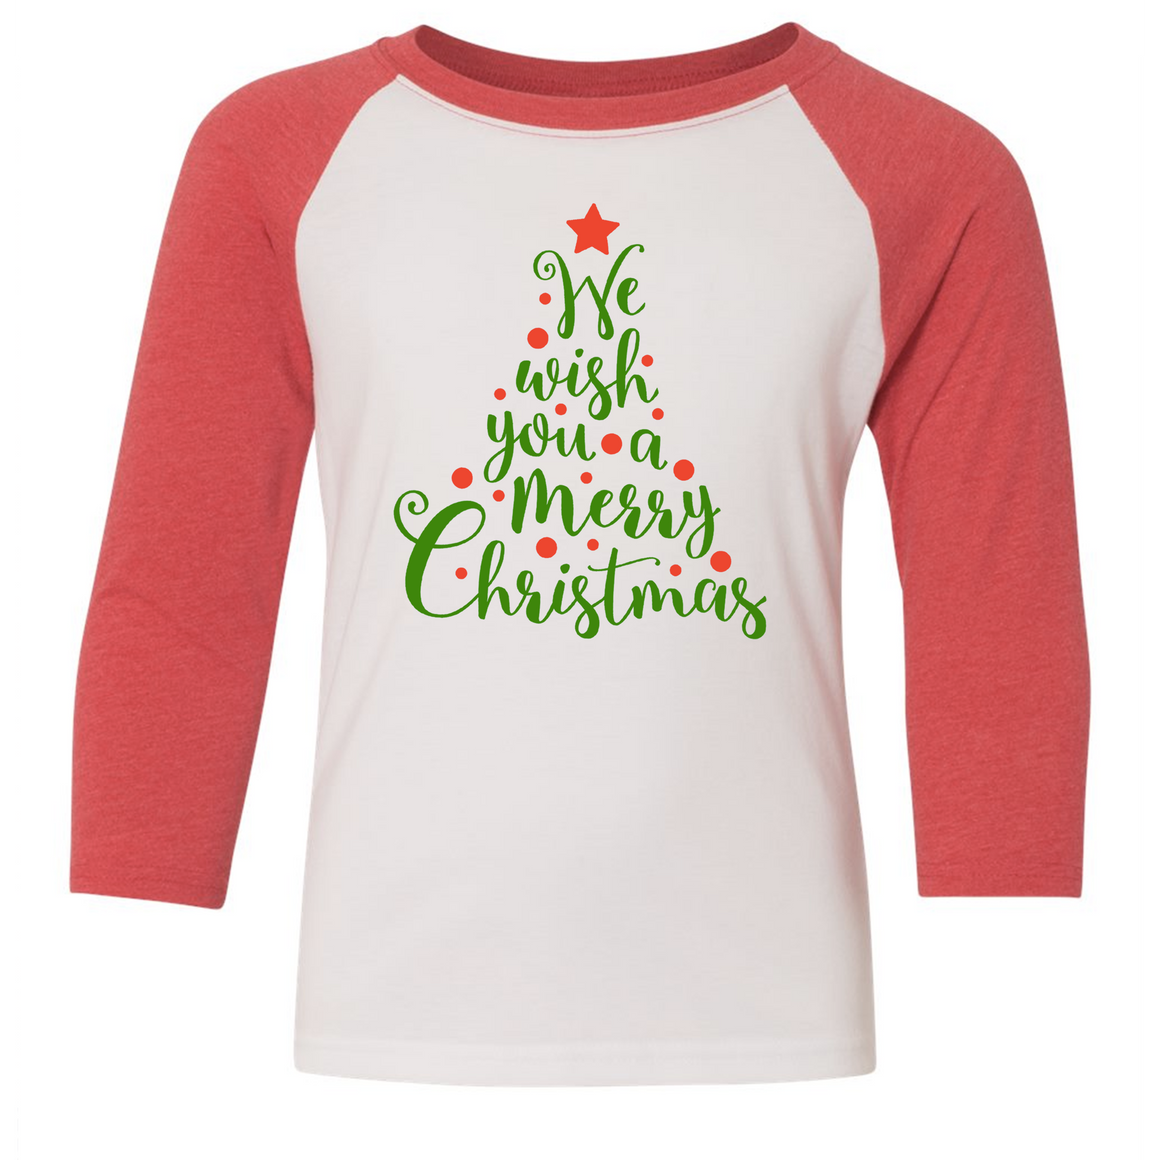 We Wish You a Merry Christmas 3/4 Sleeve Baseball Tee (Toddler and Youth)